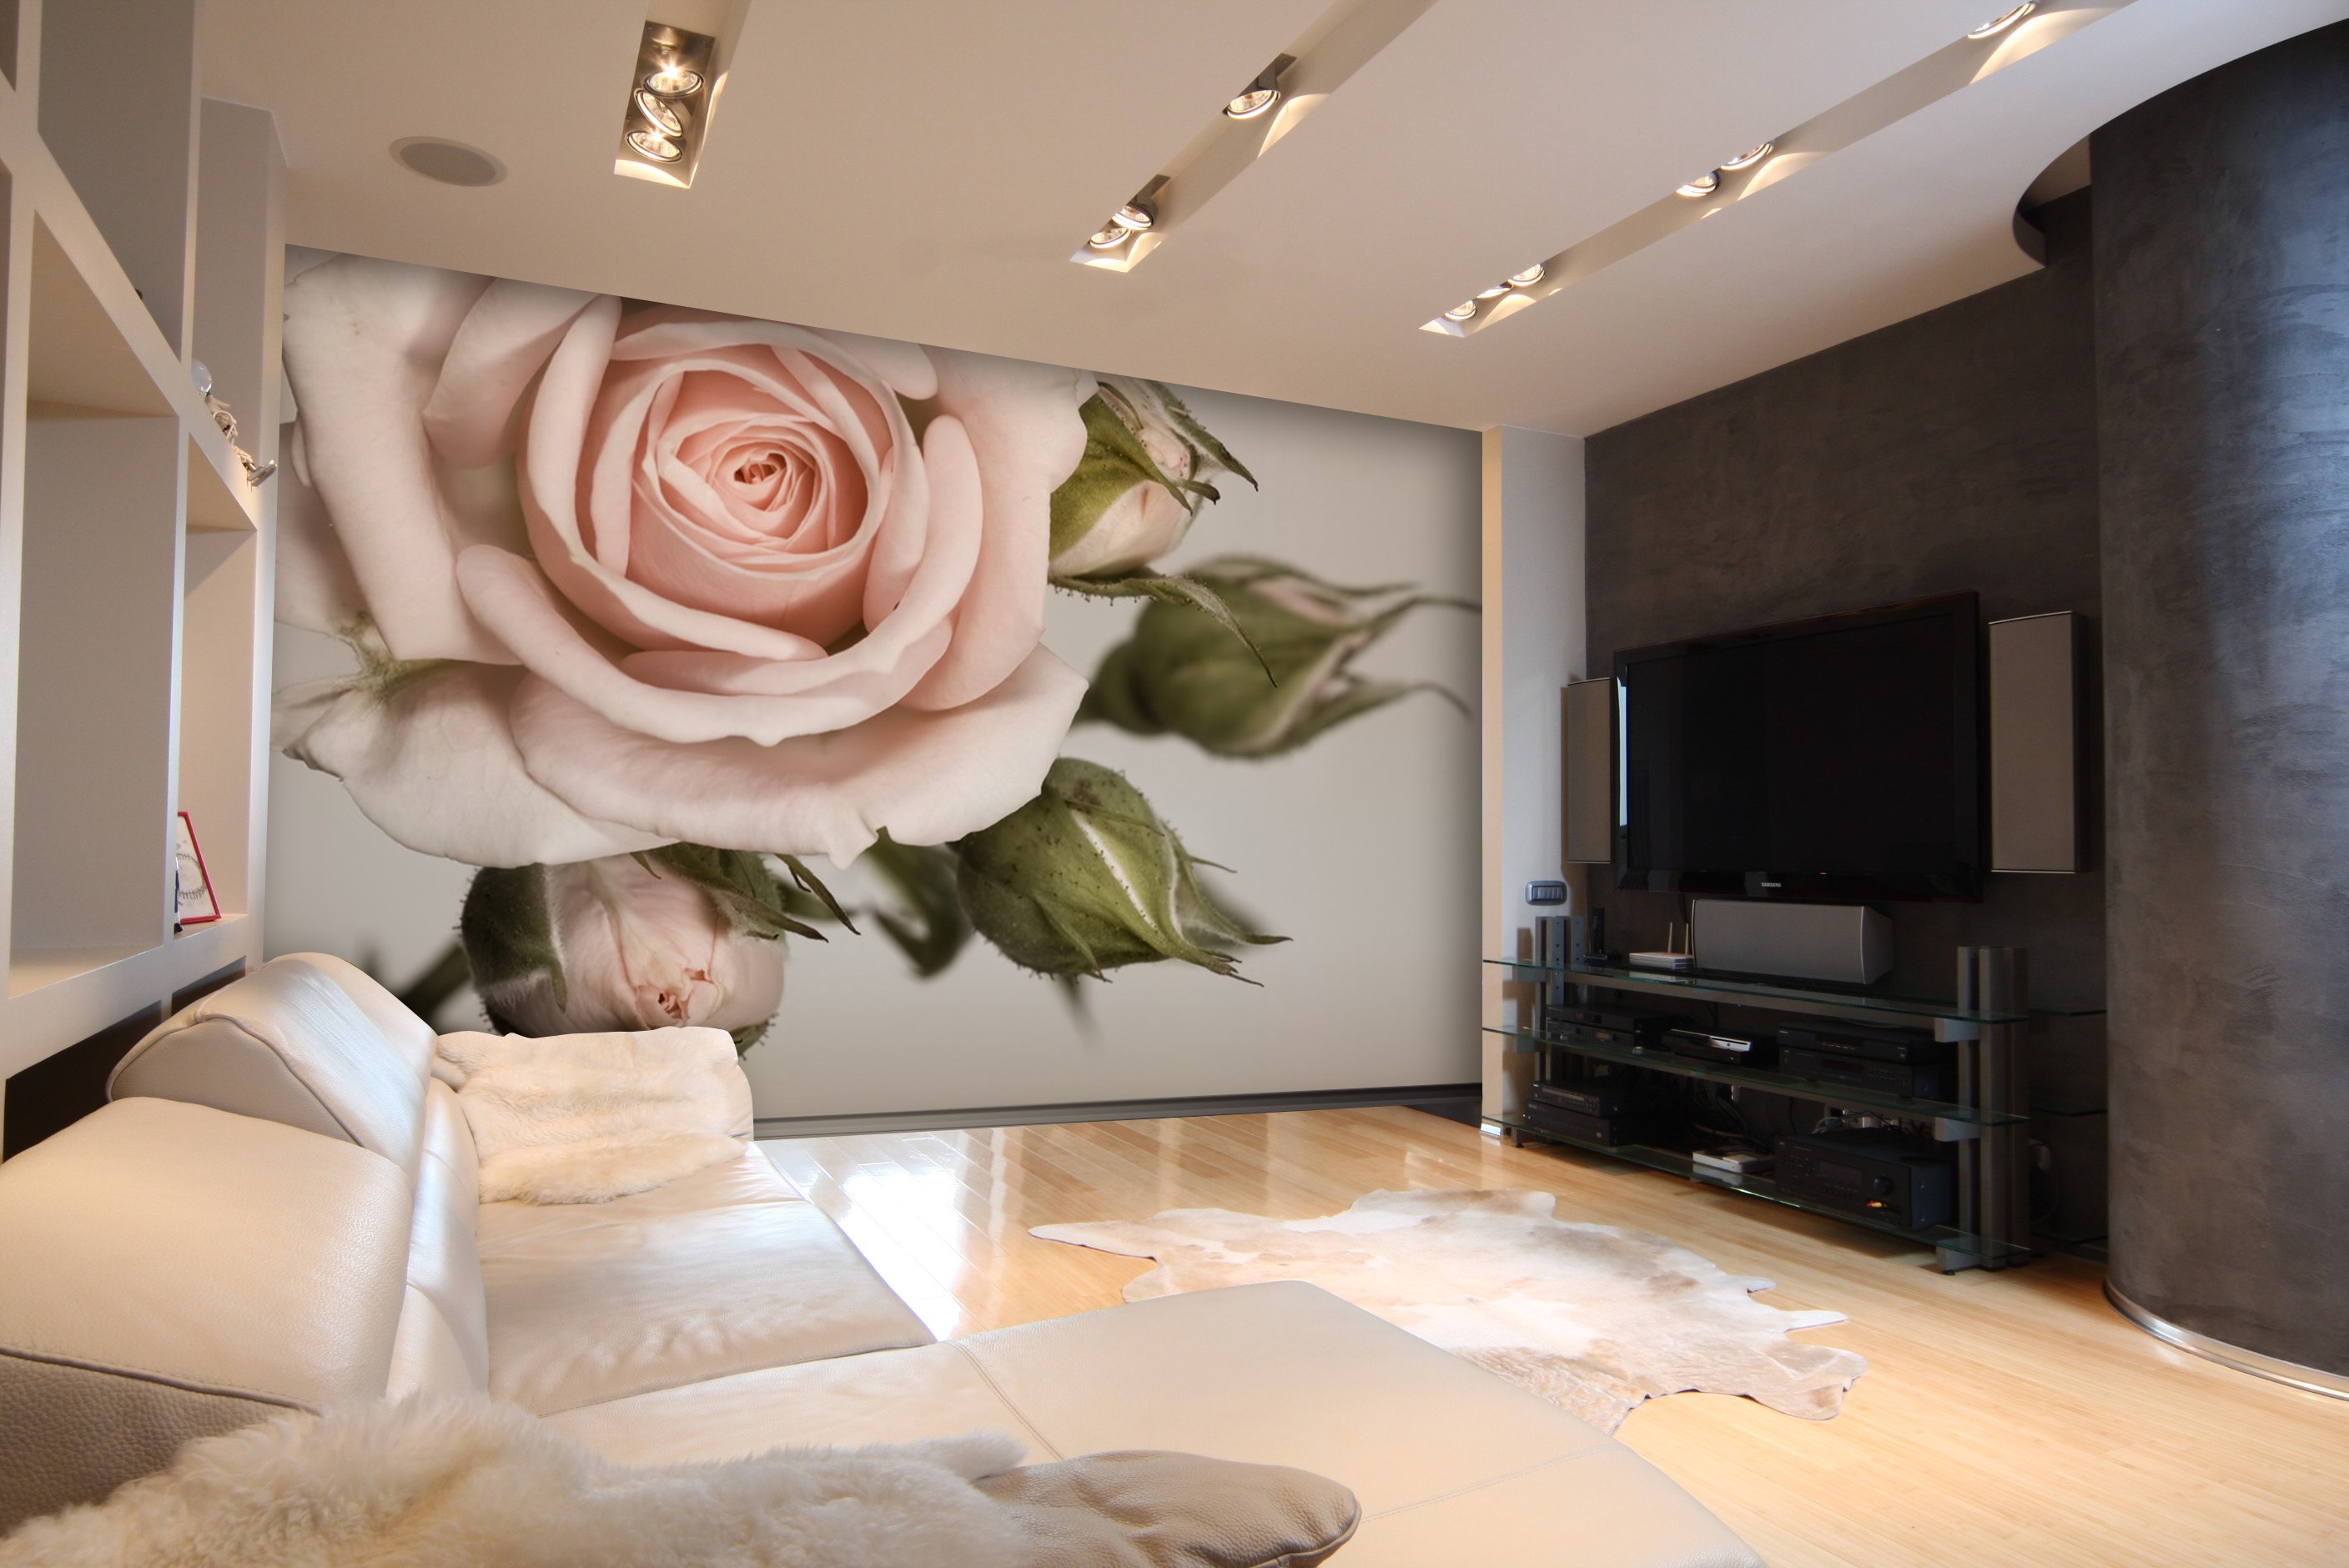 White rose wallpaper murals will fit into any room, home, or office